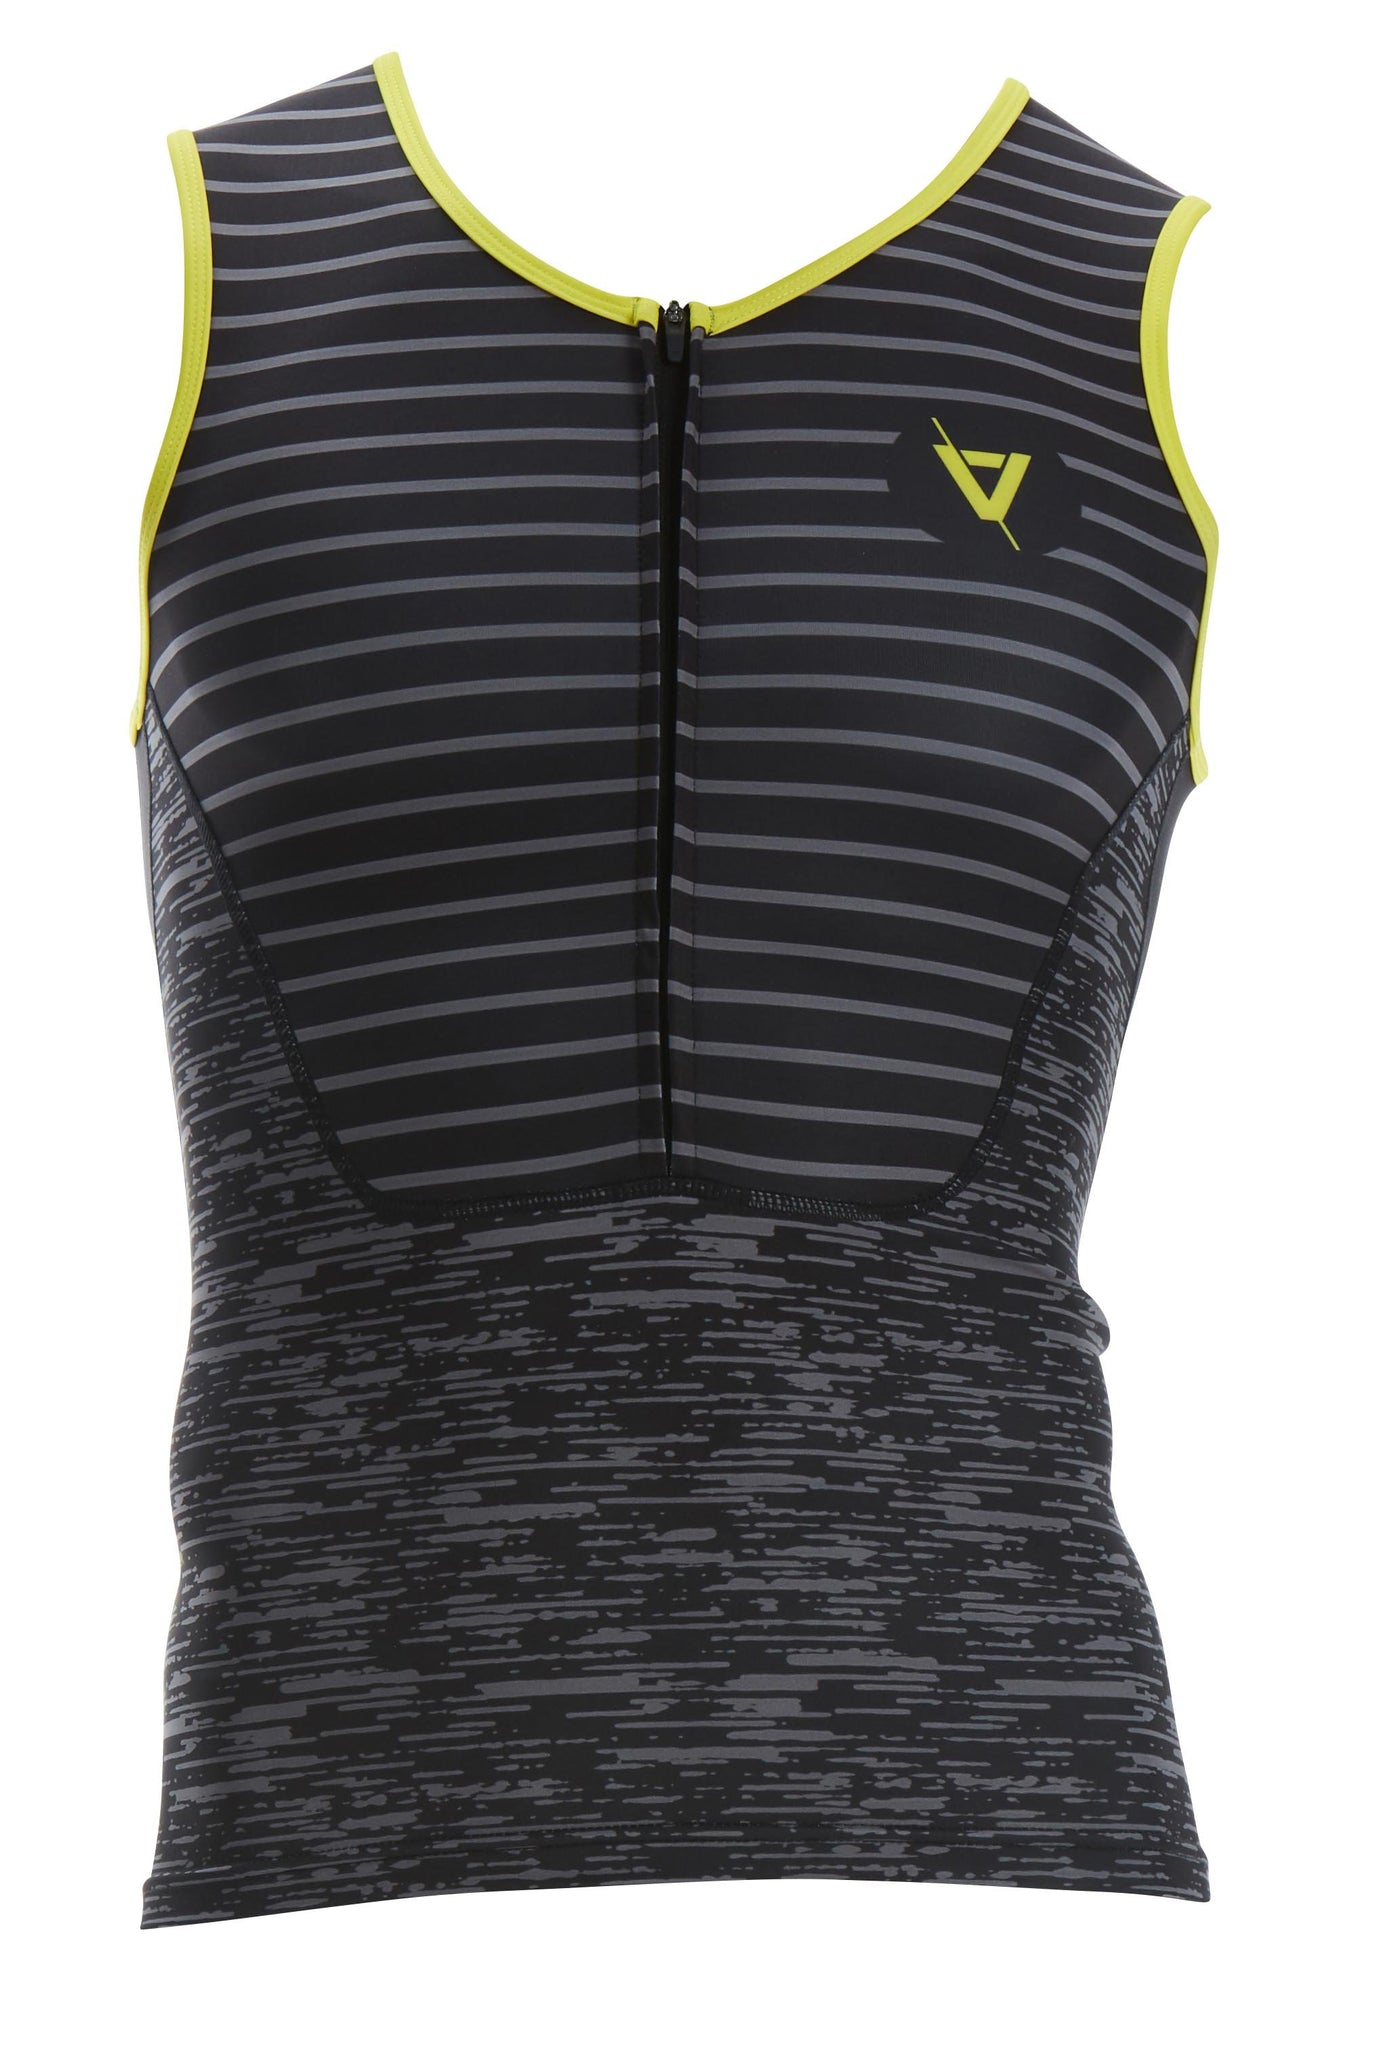 Volare Tri Top Mens Front Lifestyle